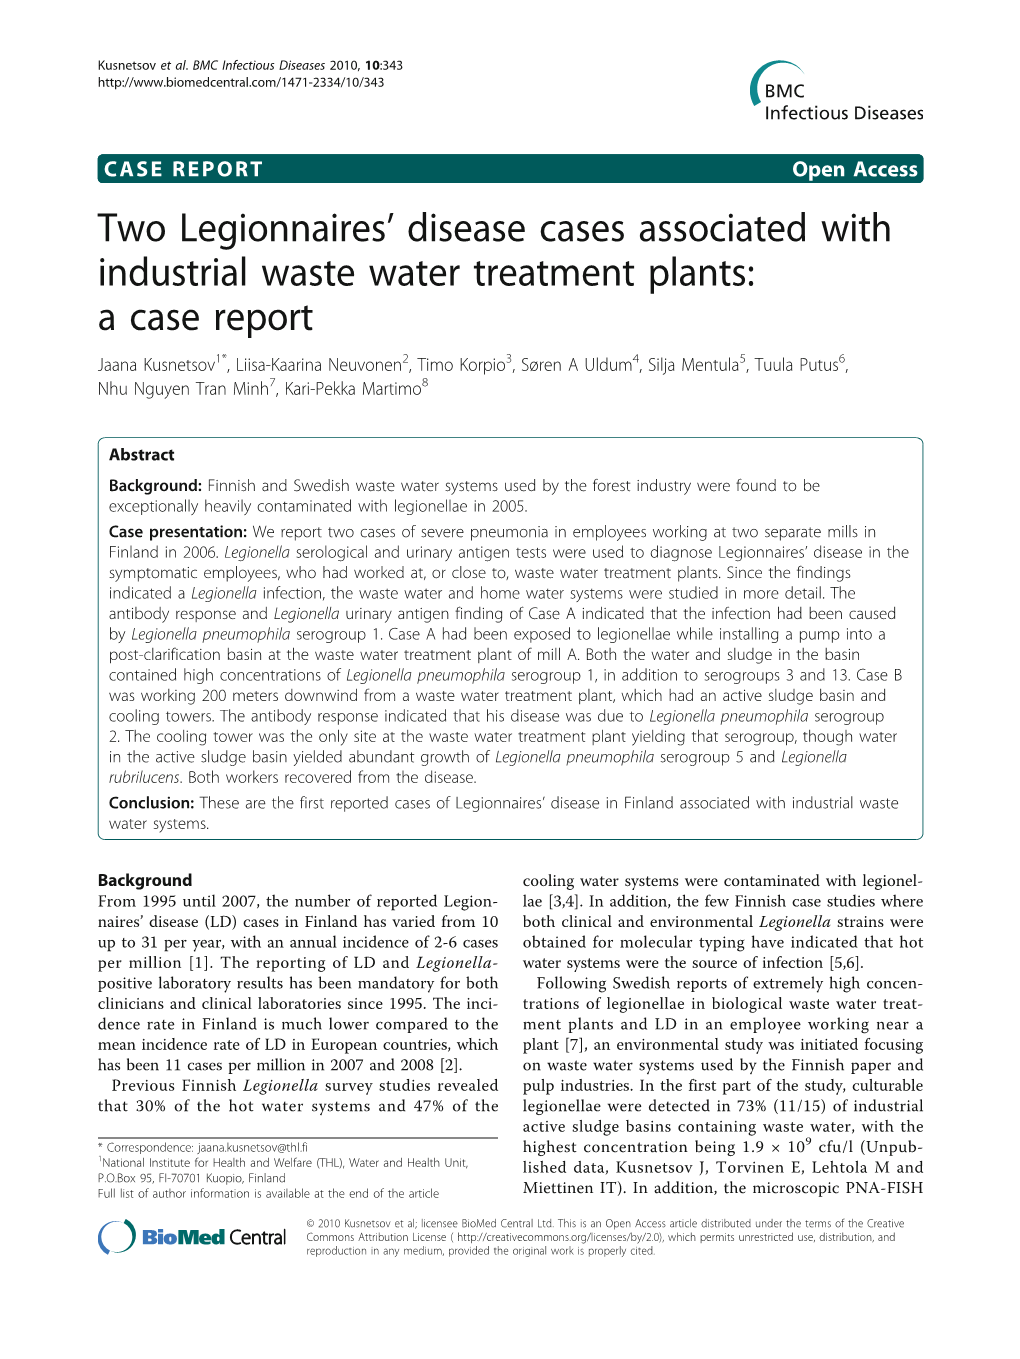 Two Legionnairesl Disease Cases Associated with Industrial Waste